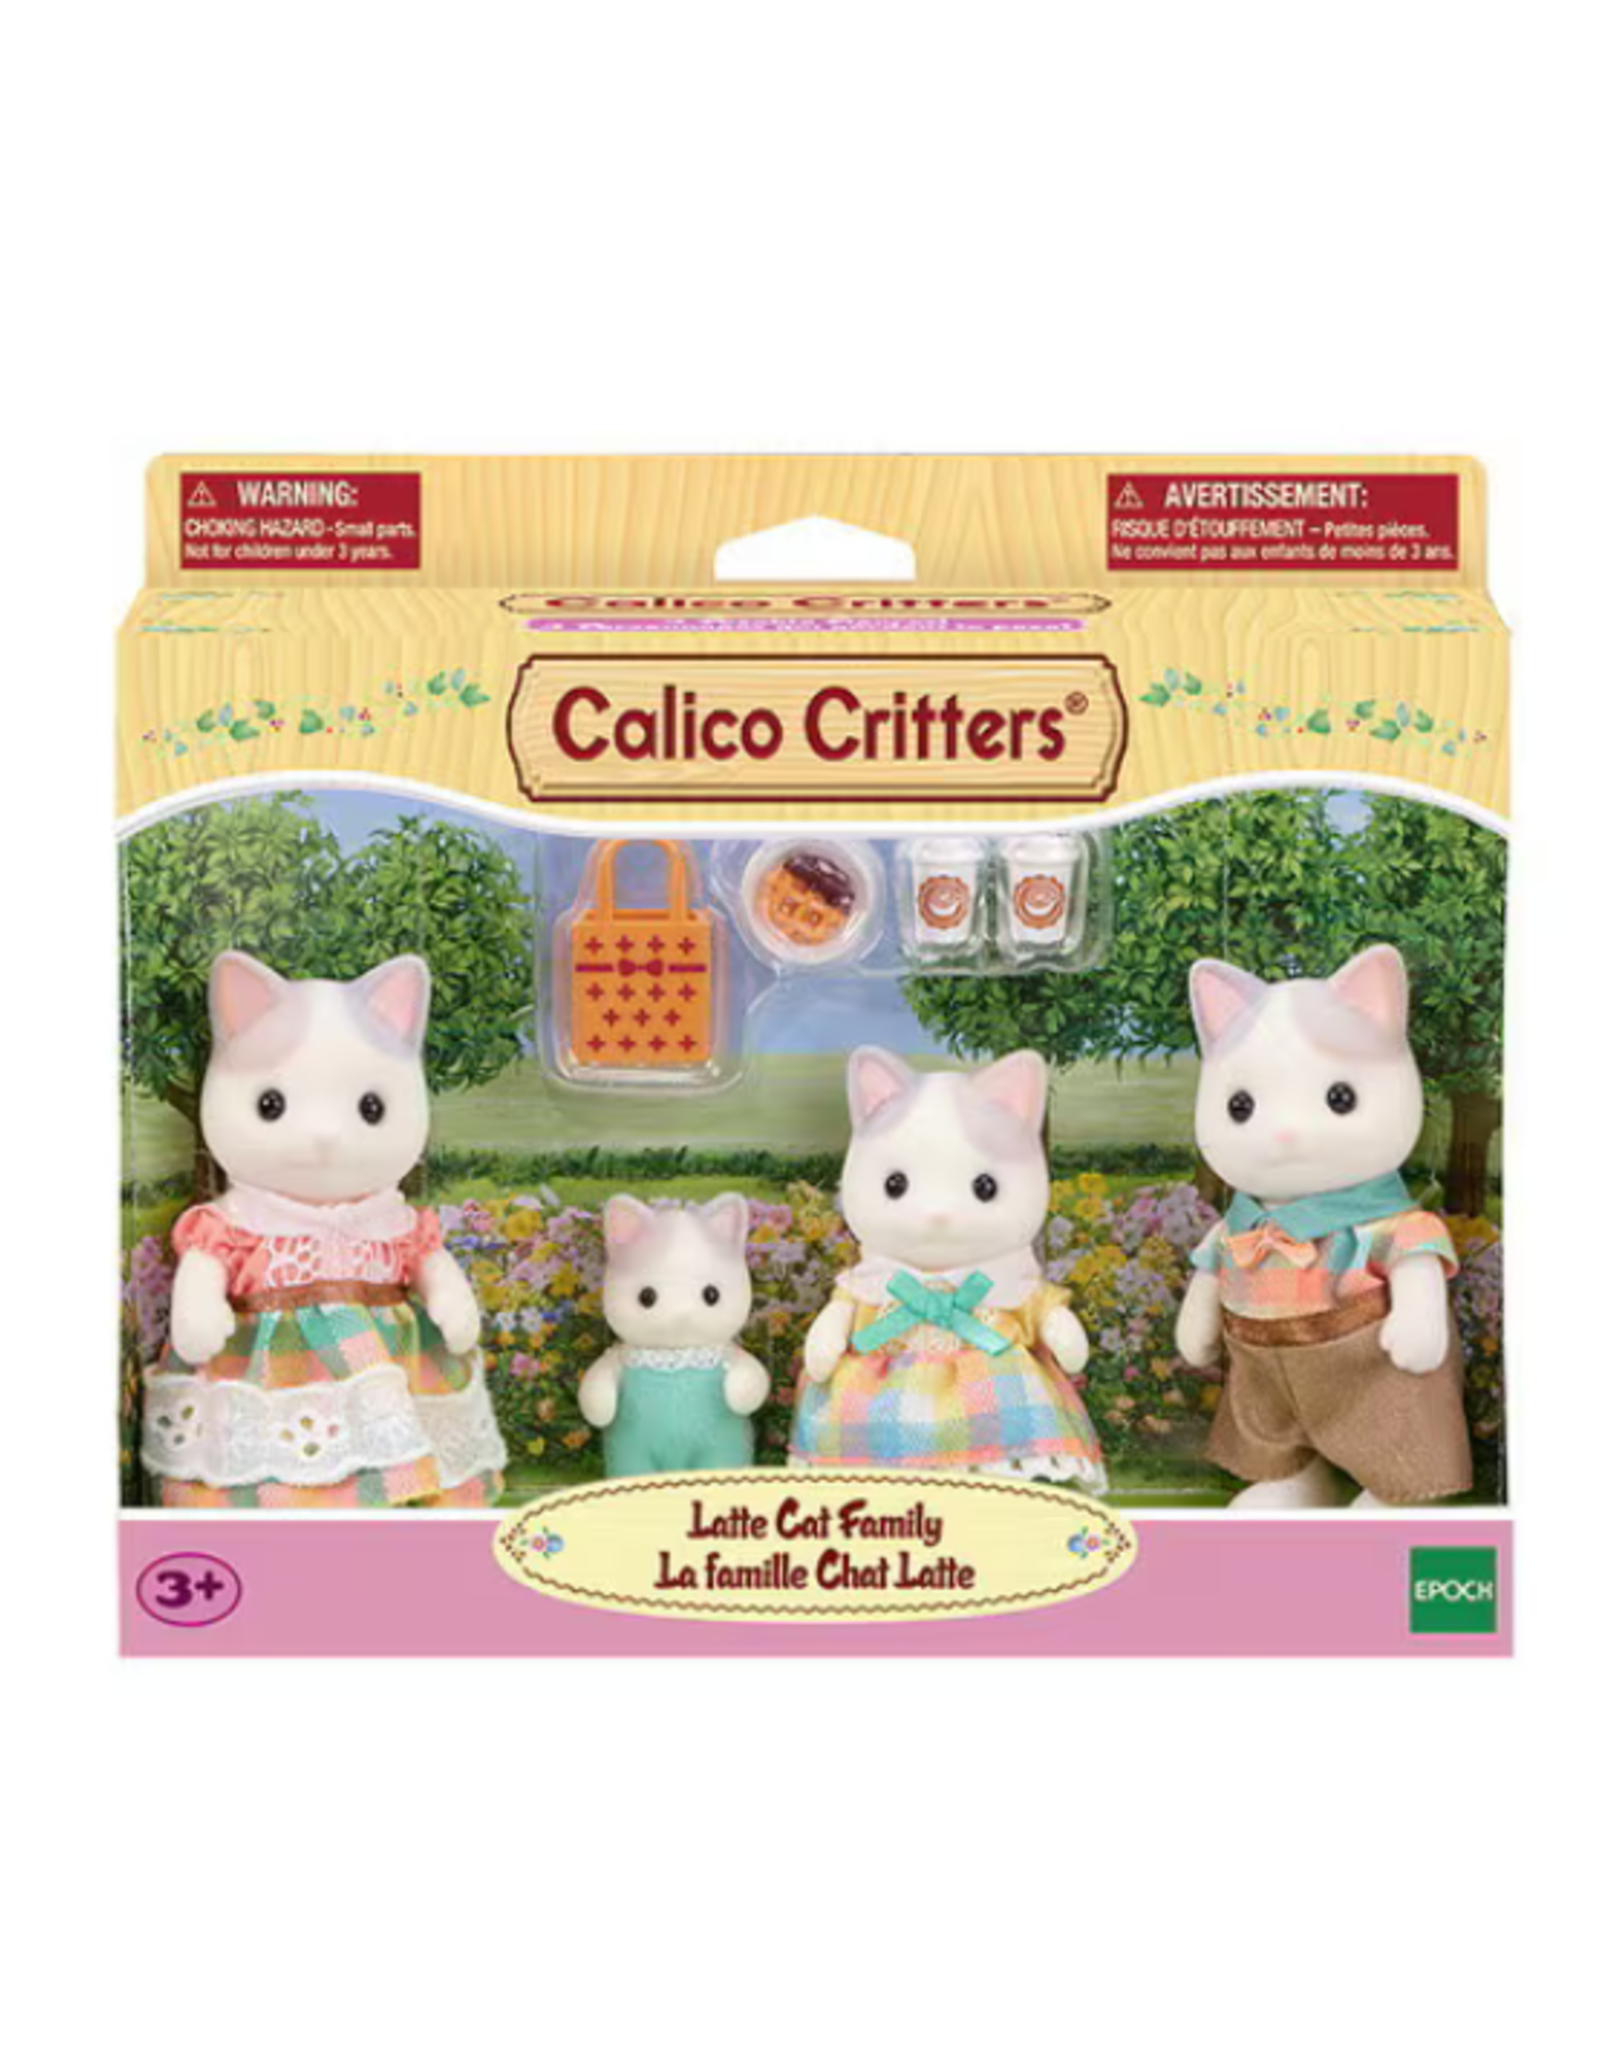 Calico Critters Calico Critters - Cat Latte Family